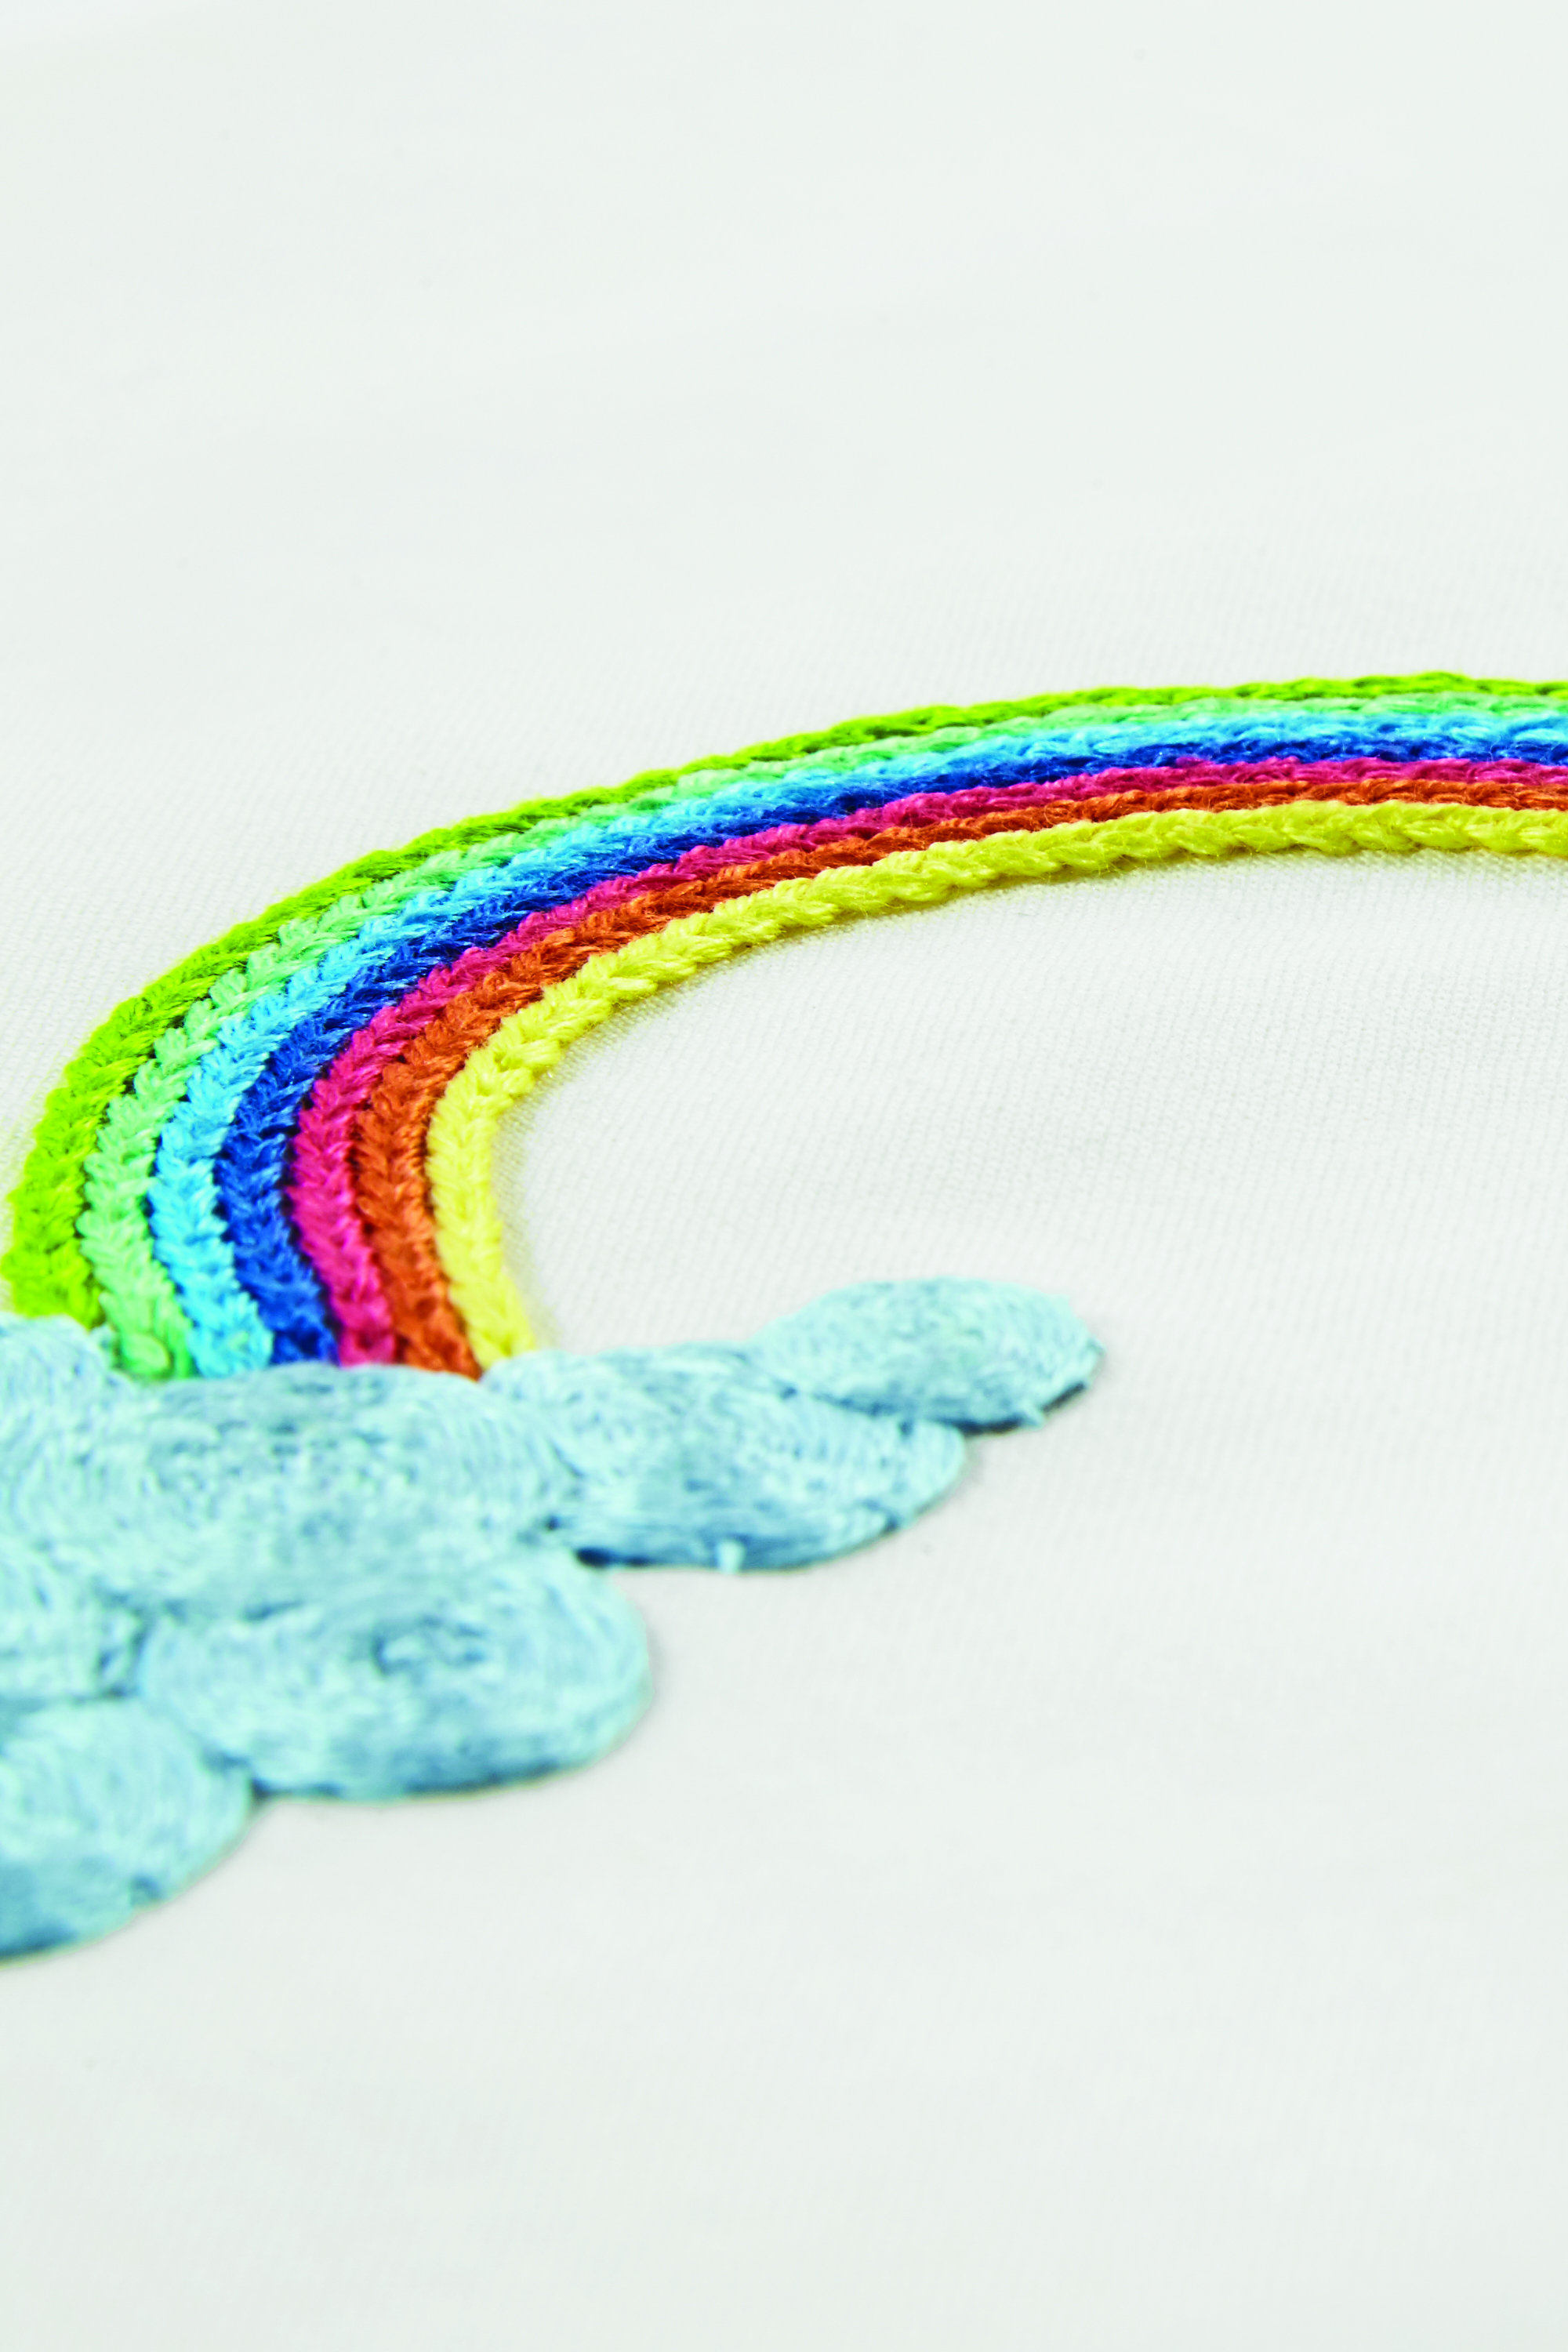 Dmc Embroidery Patterns The Lylo Rainbow Embroidery Pattern